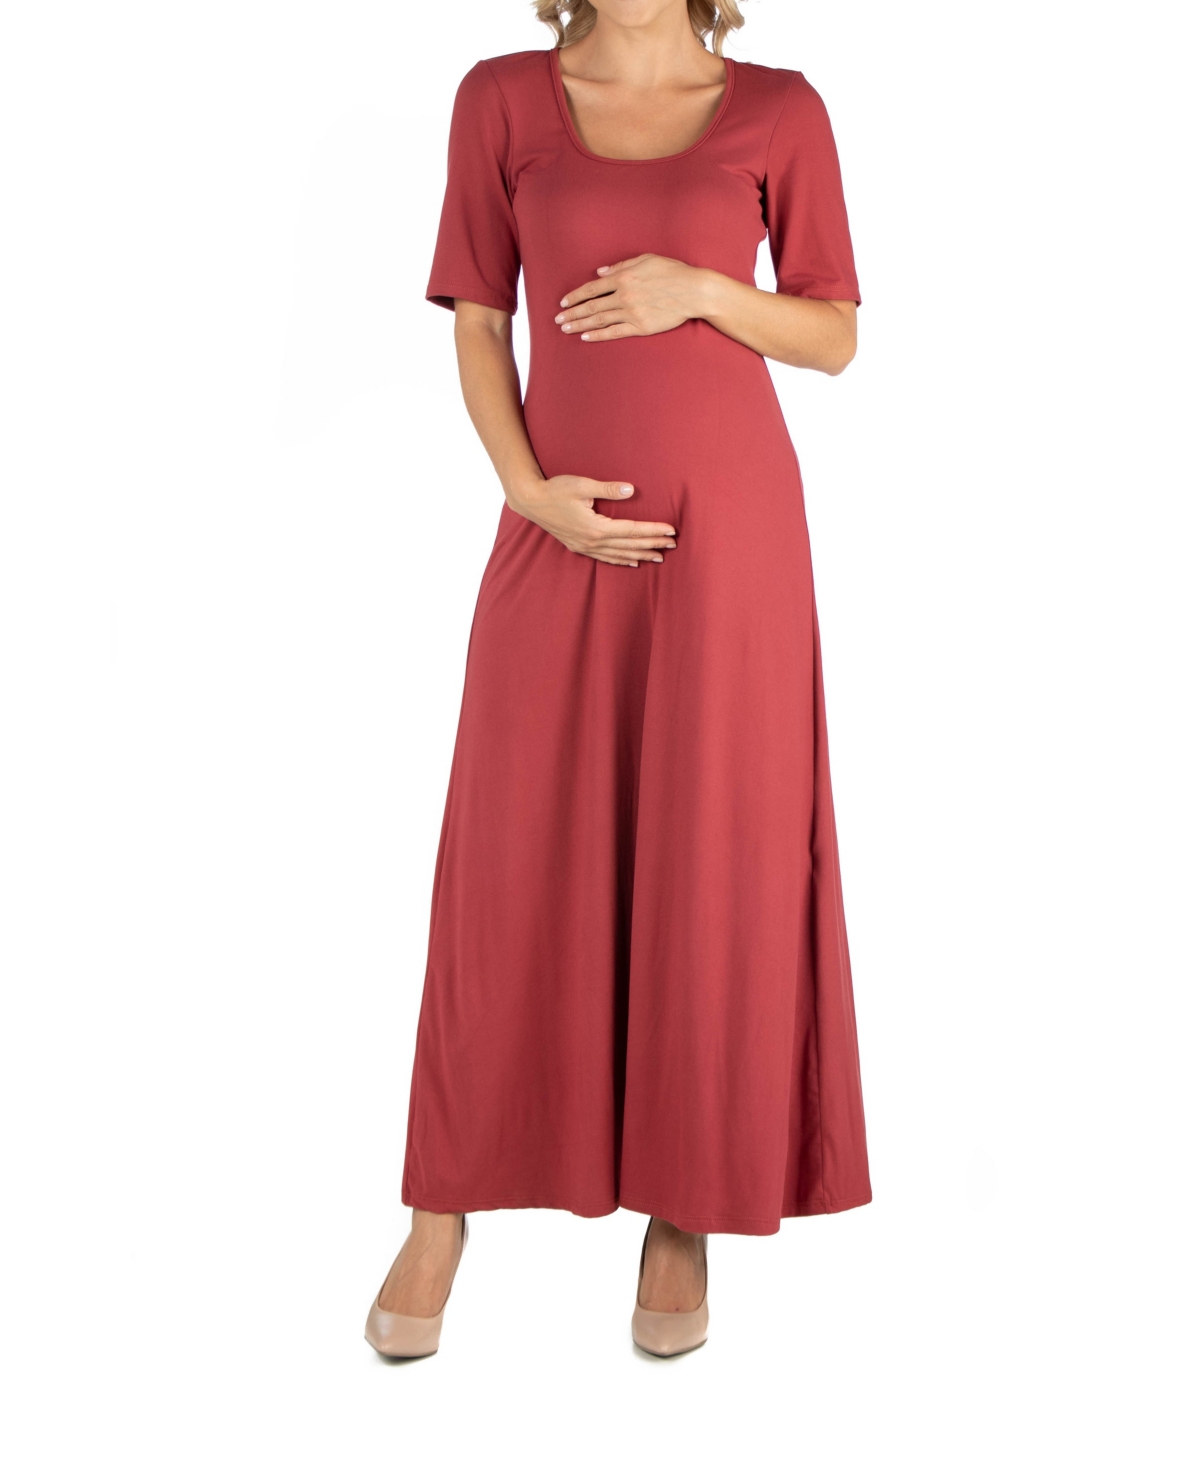 Casual Maternity Maxi Dress with Sleeves - Navy